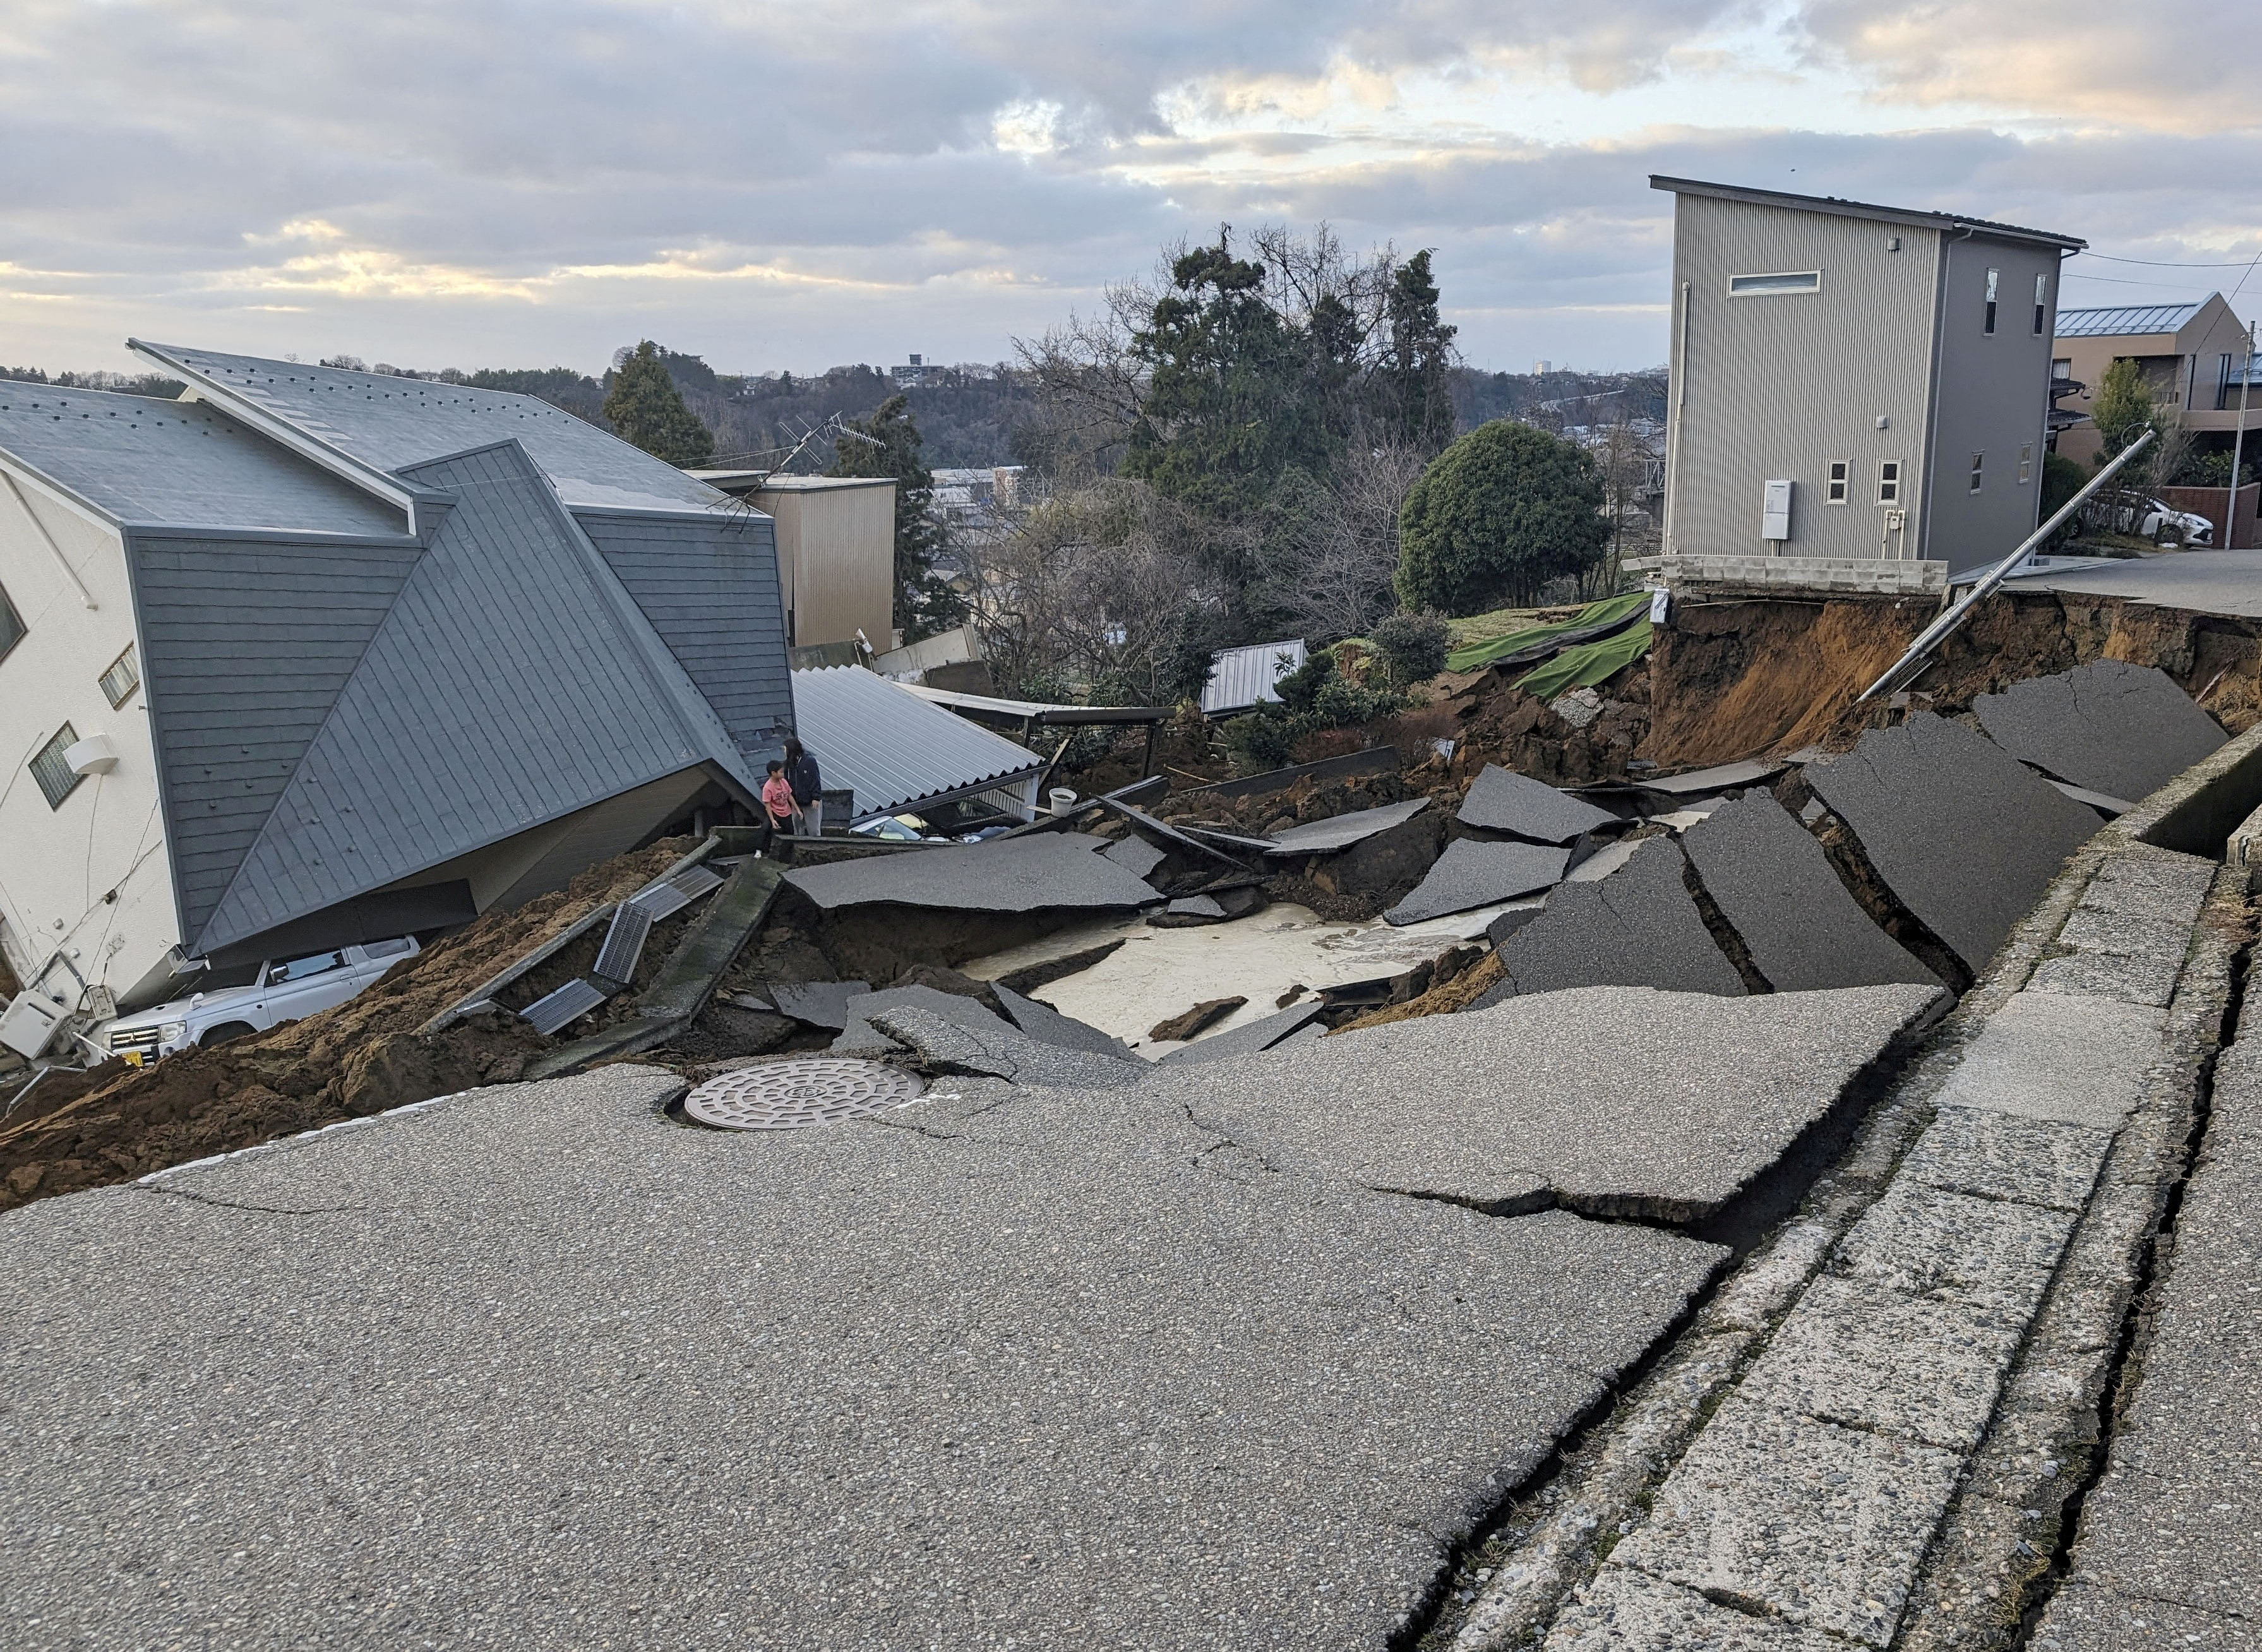 A collapsed road and houses are pictured following an earthquake in Wajima, Japan, on January 1.